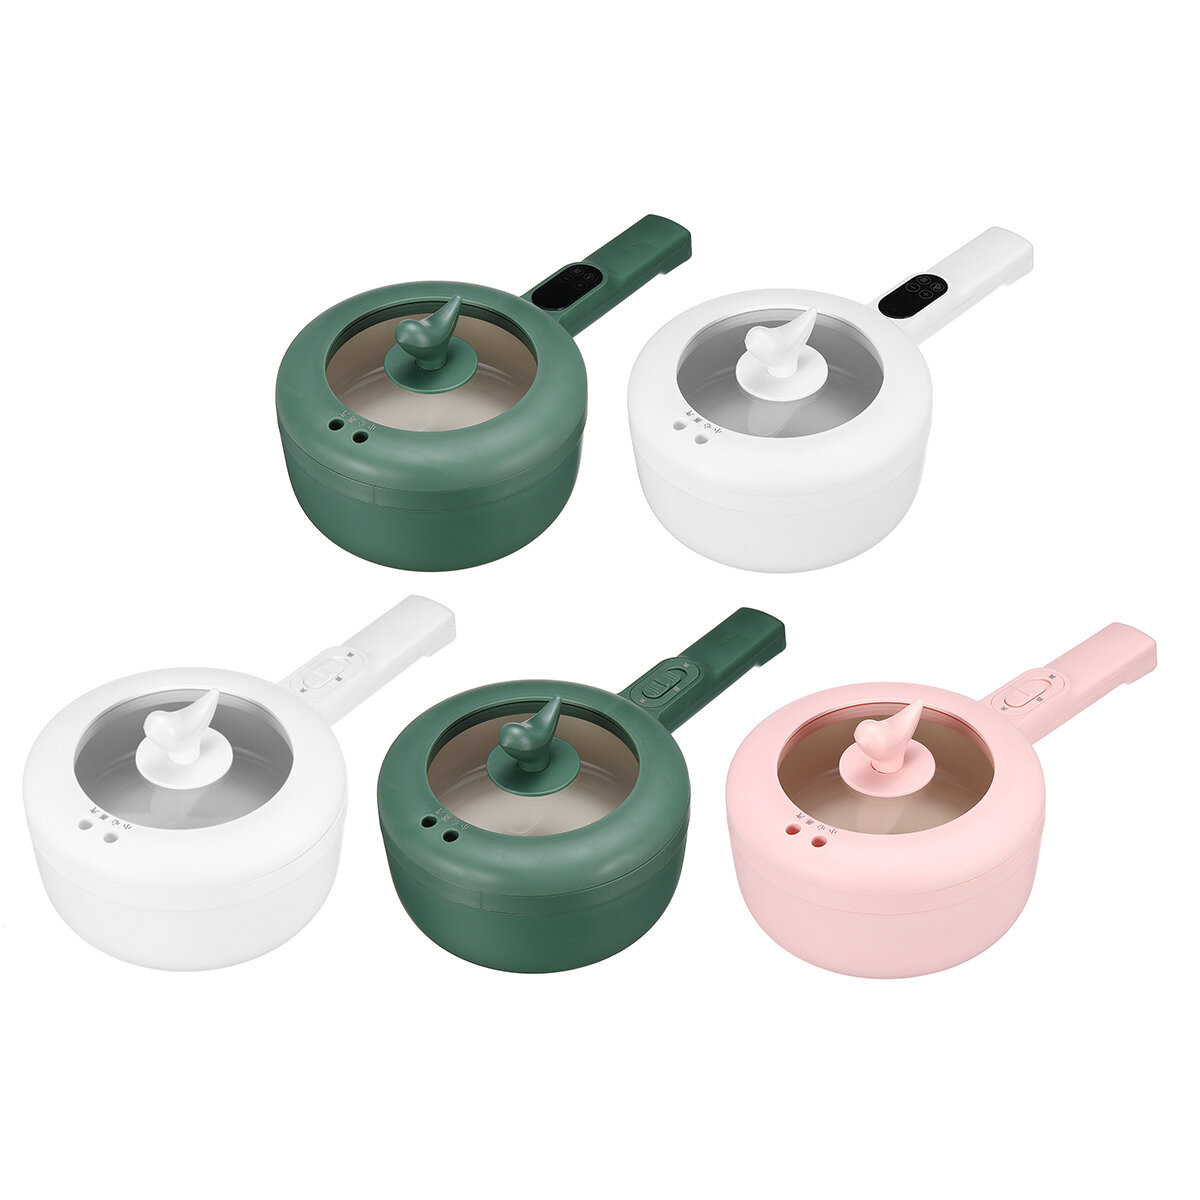 Image of 700W Portable Electric Cooking Pot Food Steamer Multi-purpose Pot